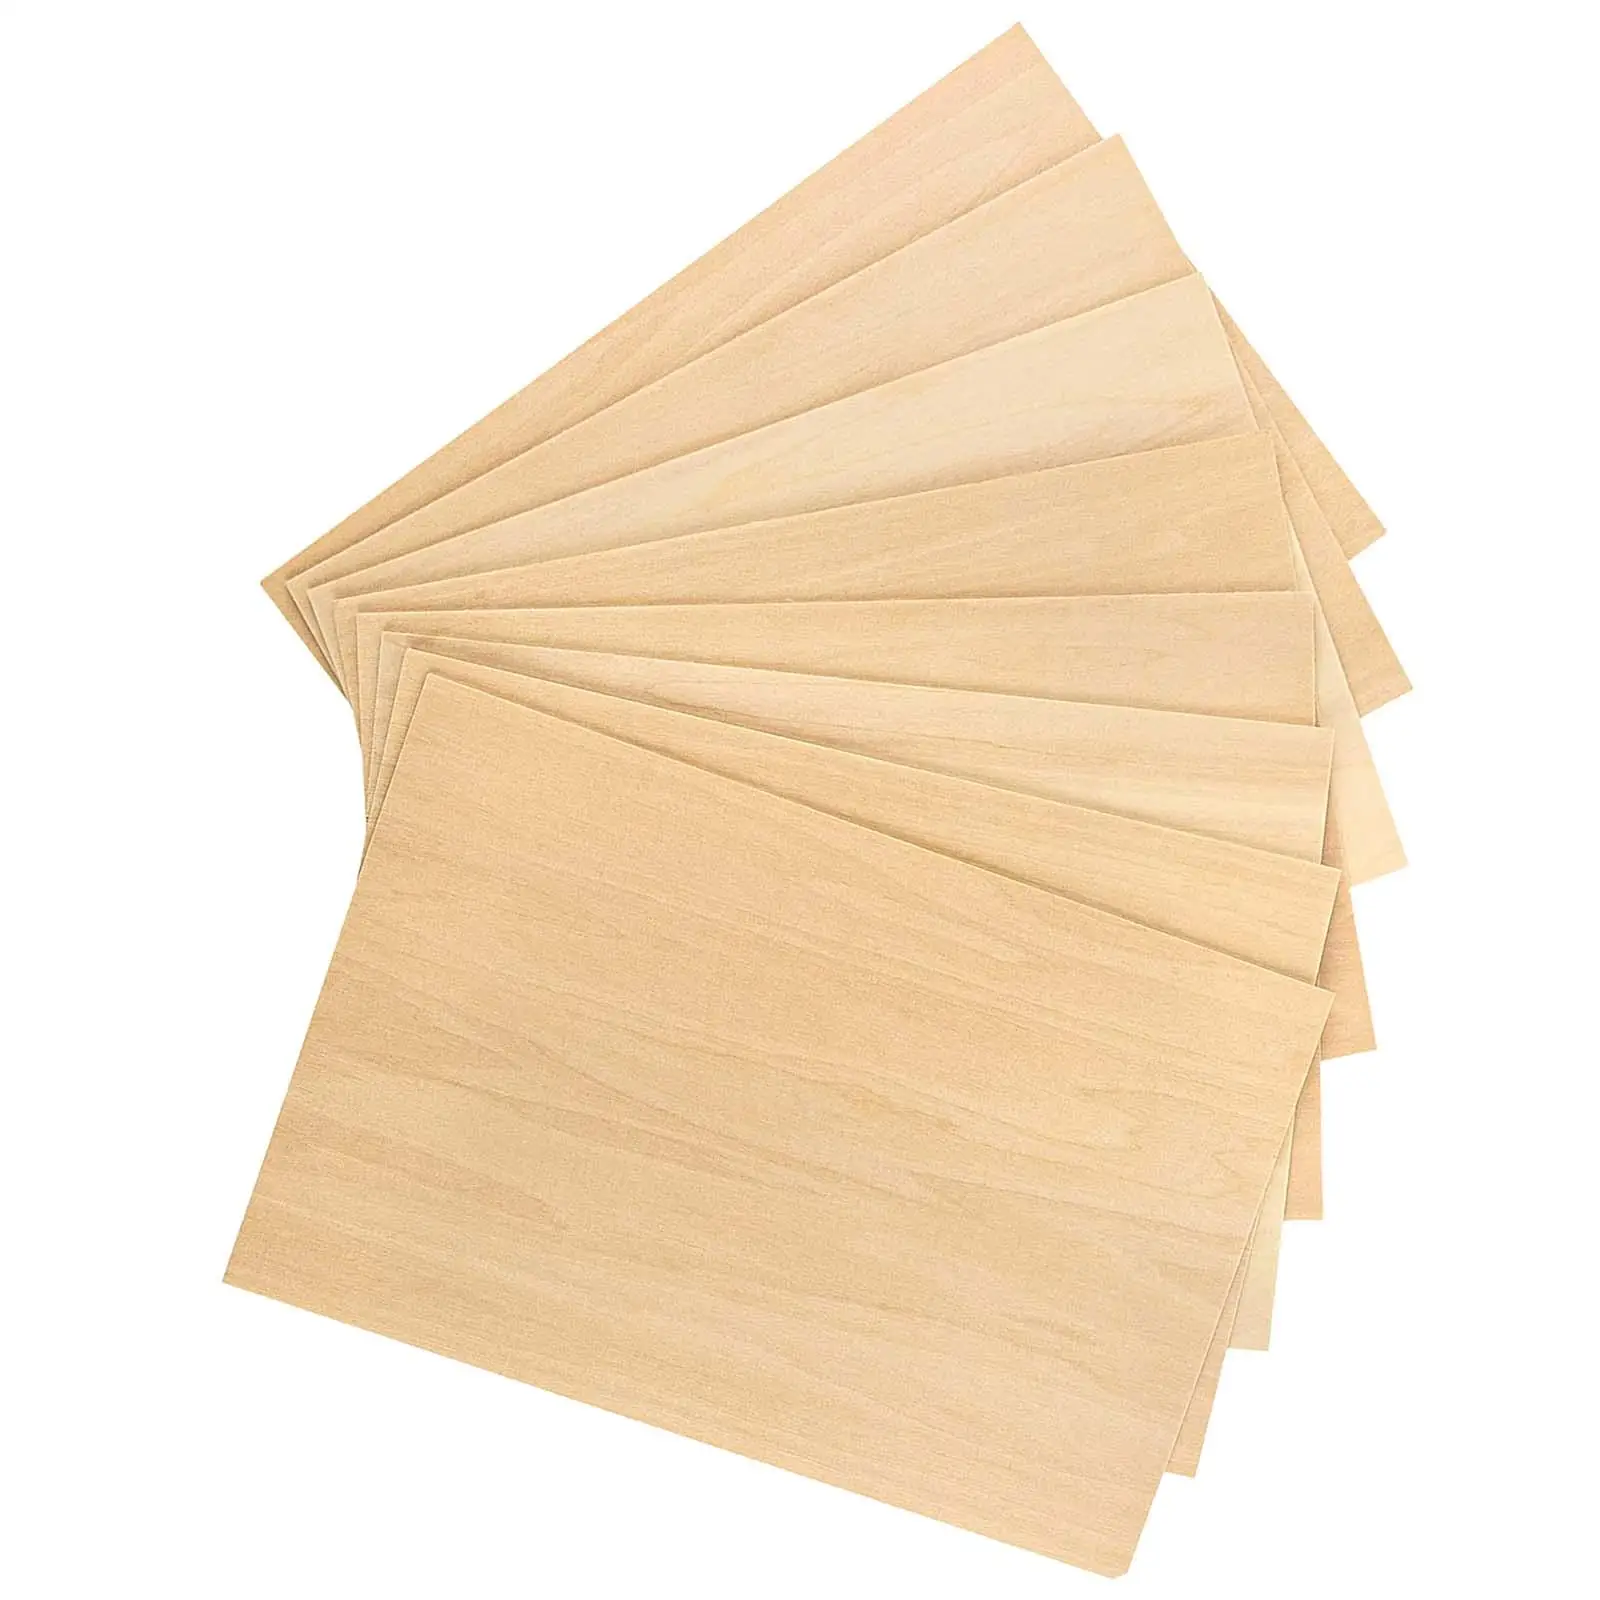 8x Unfinished Wood Miniature Models Making Thin Plywood Board for Making Plane Model Crafts DIY Project Miniature Aircraft